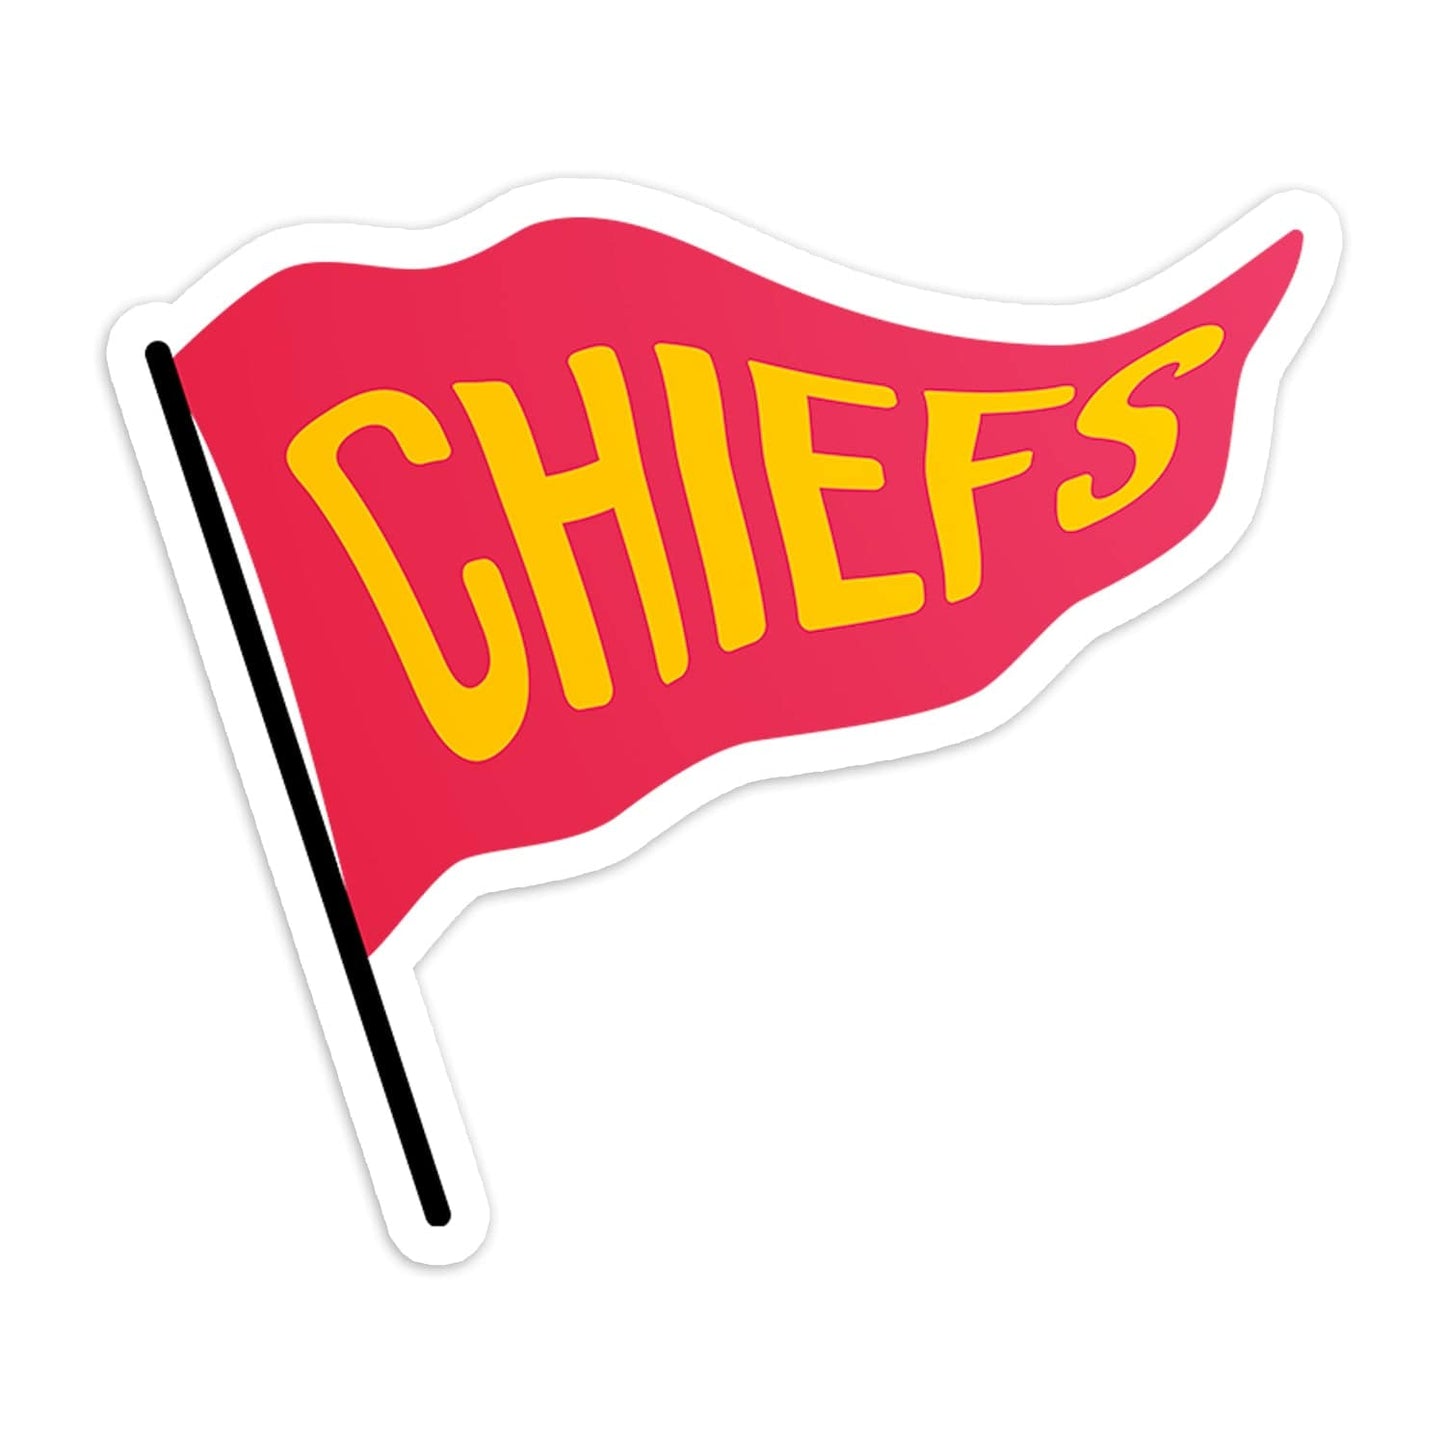 Kc Chiefs Stickers for Sale